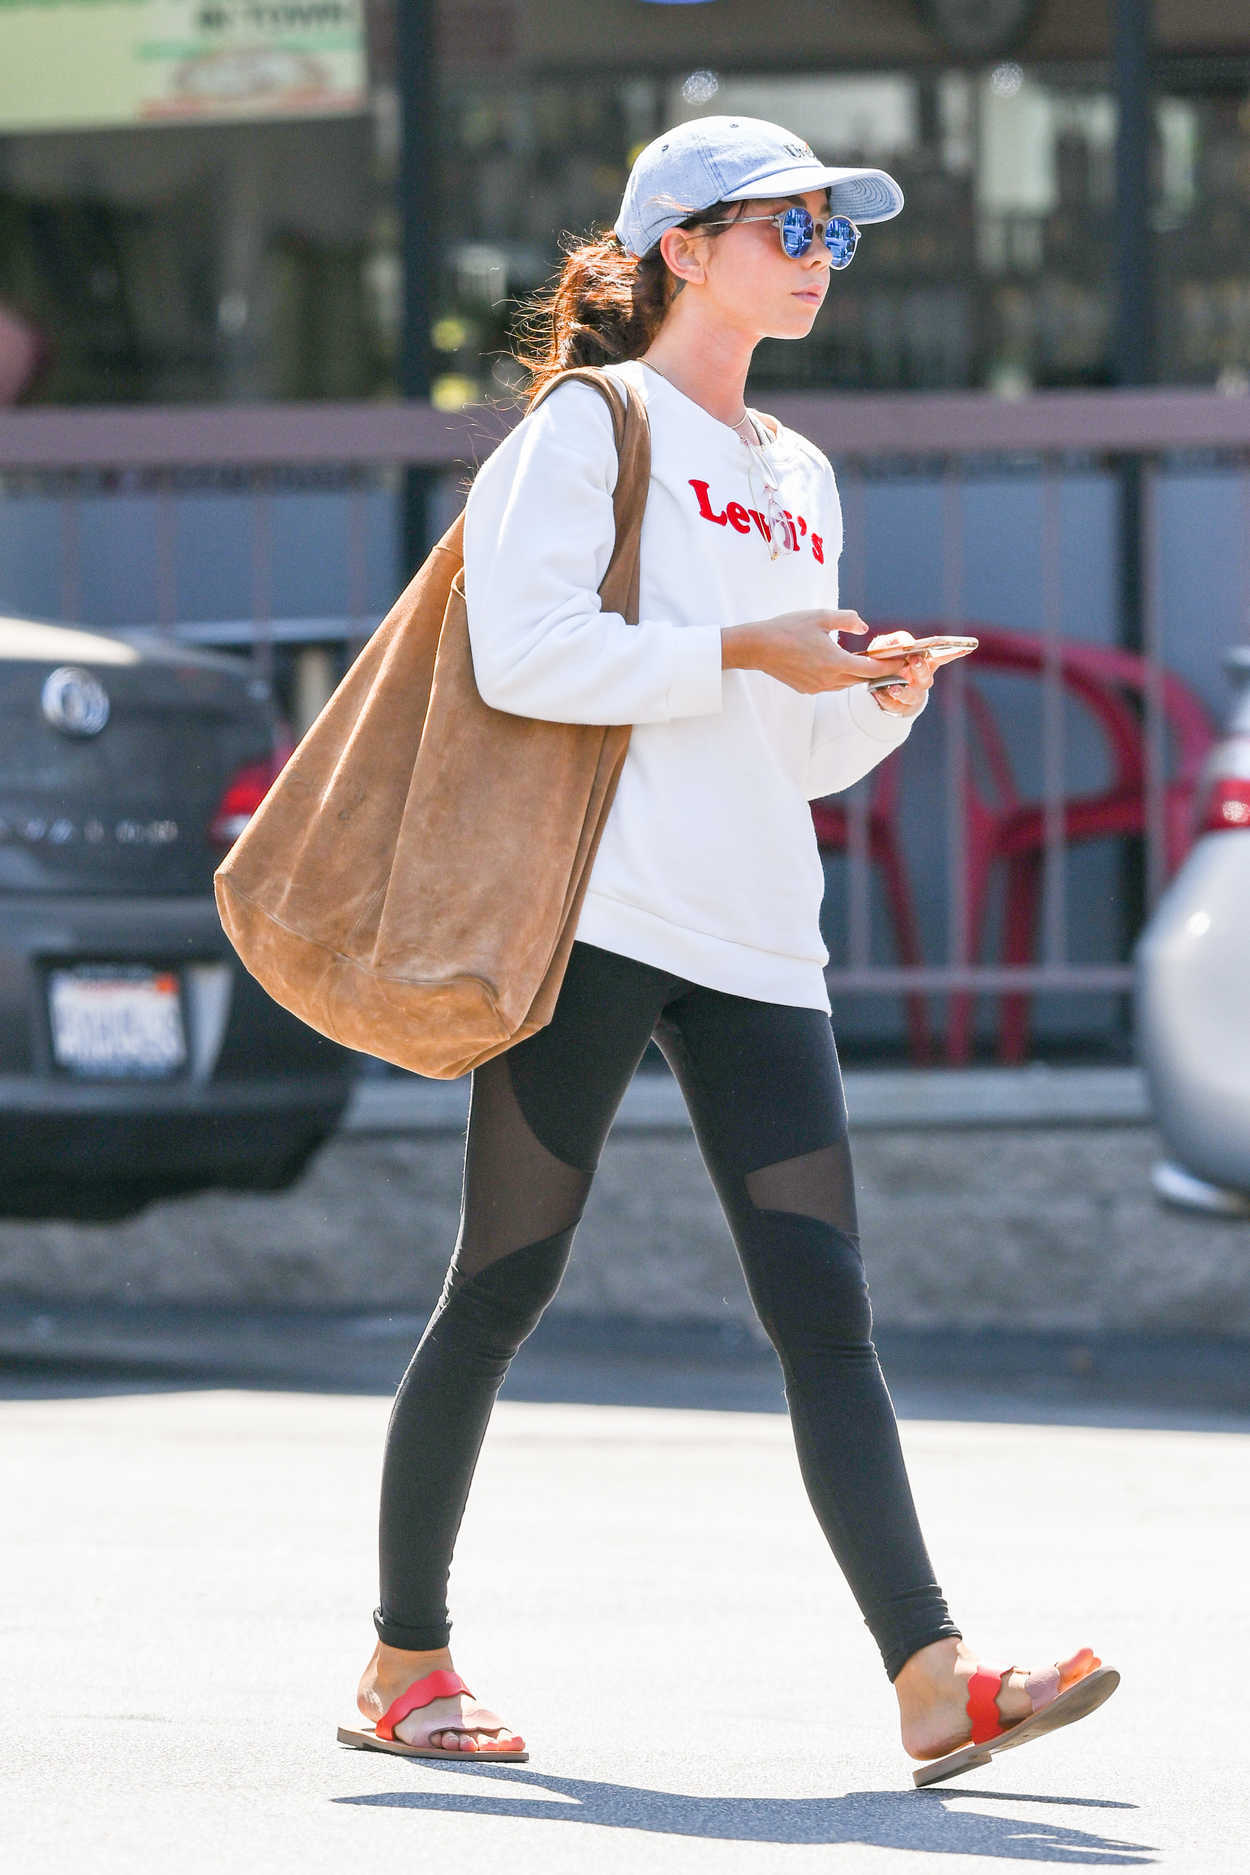 Sarah Hyland in a White Levis Sweatshirt Leaves a Cryotherapy Session ...